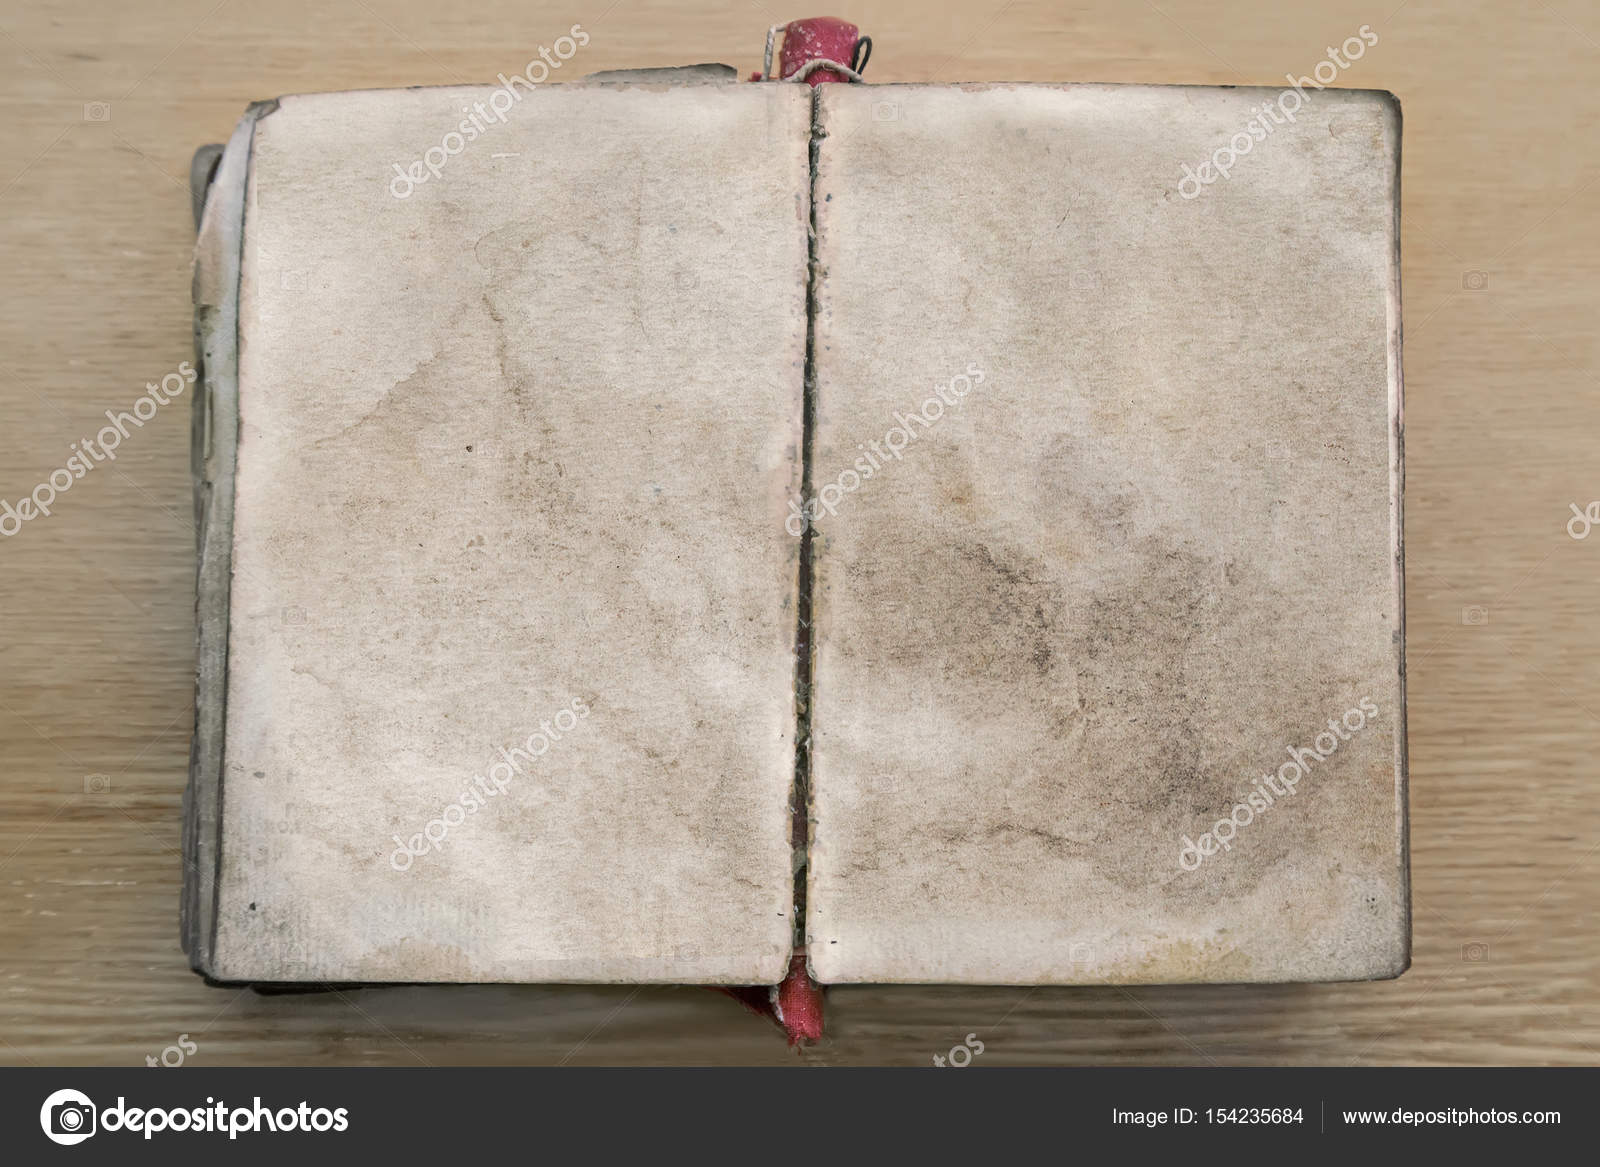 Opened Old Book Blank Pages Stock Photo 71688136